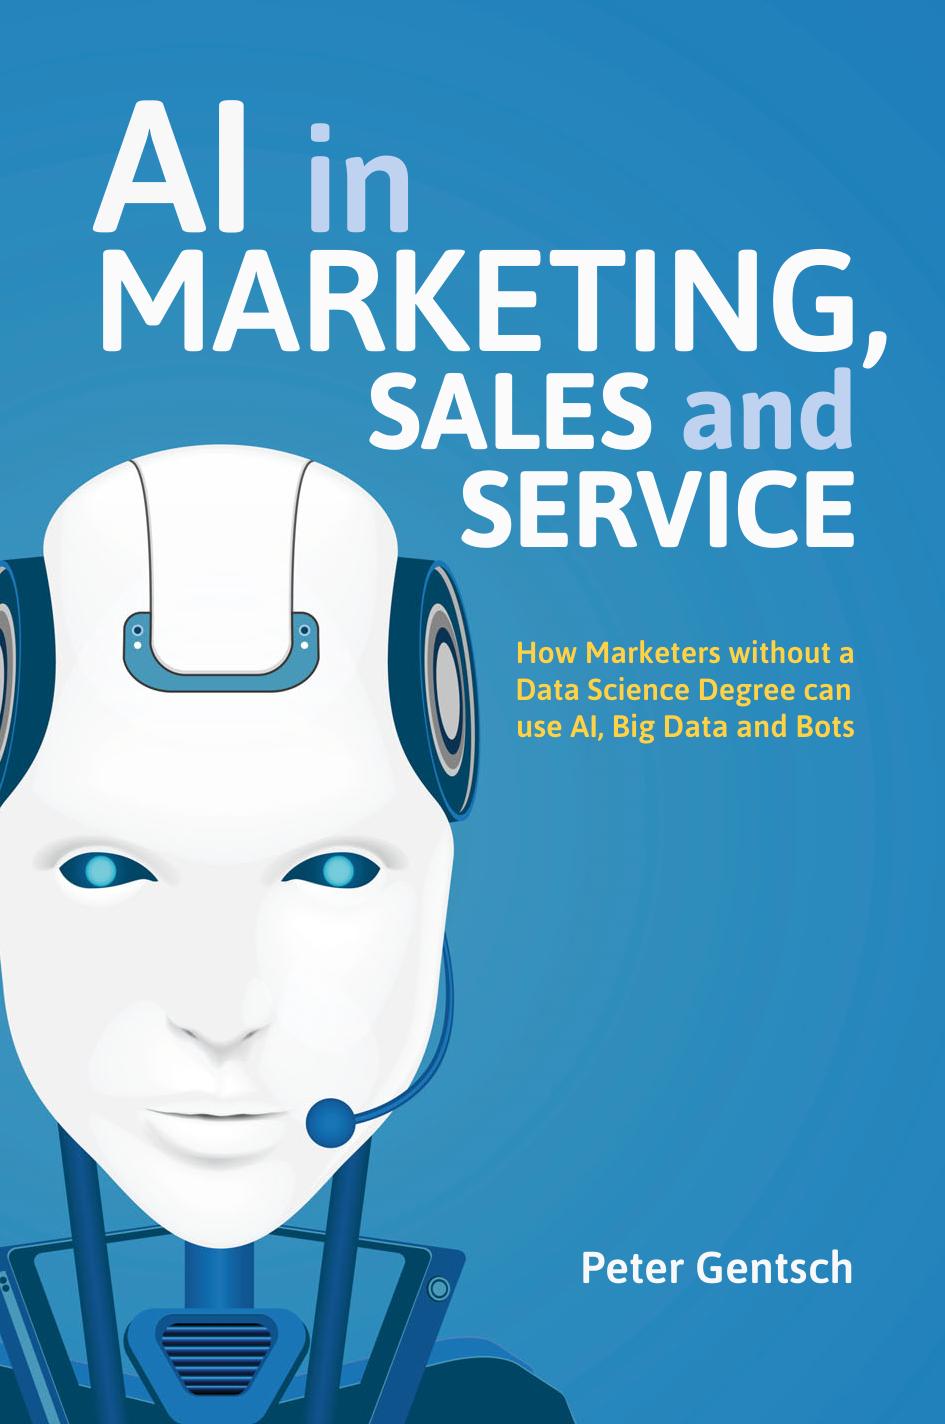 AI in Marketing, Sales and Service: How Marketers Without a Data Science Degree Can Use AI, Big Data and Bots